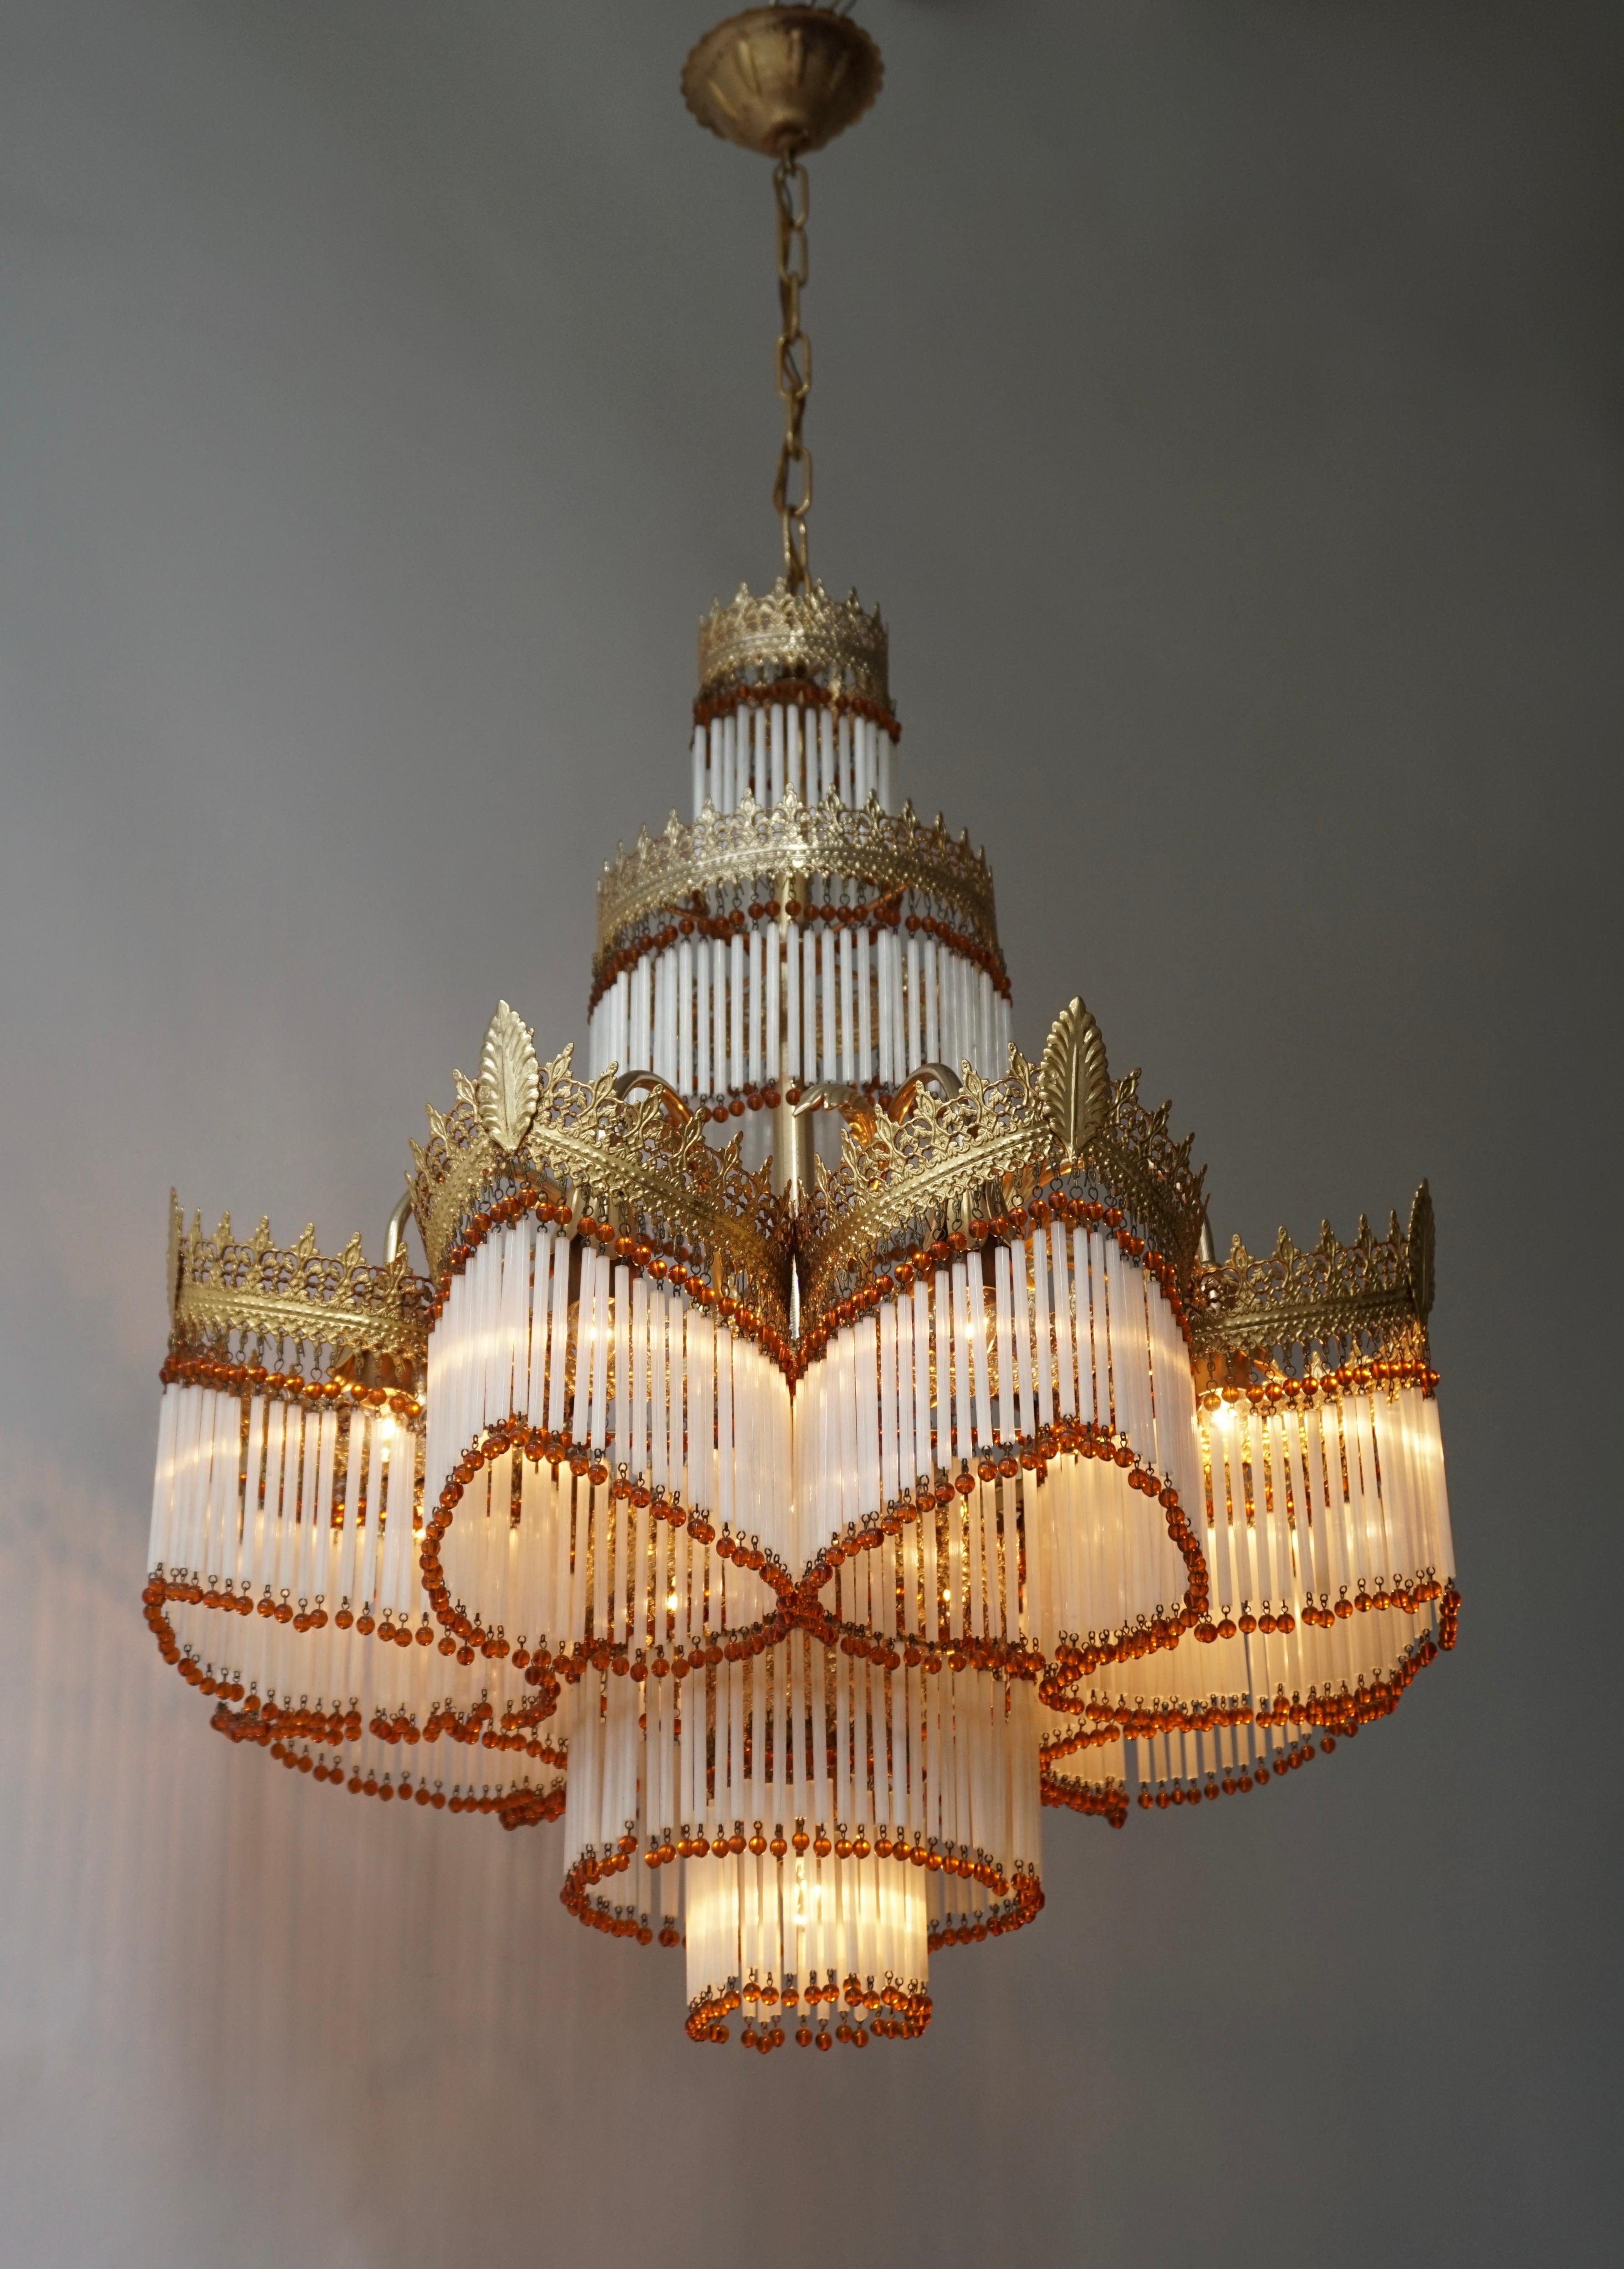 Beautiful large Italian Art nouveau Murano glass and brass gilt chandelier.

The light requires nine single E14 screw fit lightbulbs (60Watt max.) LED compatible.

Measures: 
Diameter 62 cm.
Height fixture 75 cm.
Total height including the chain and